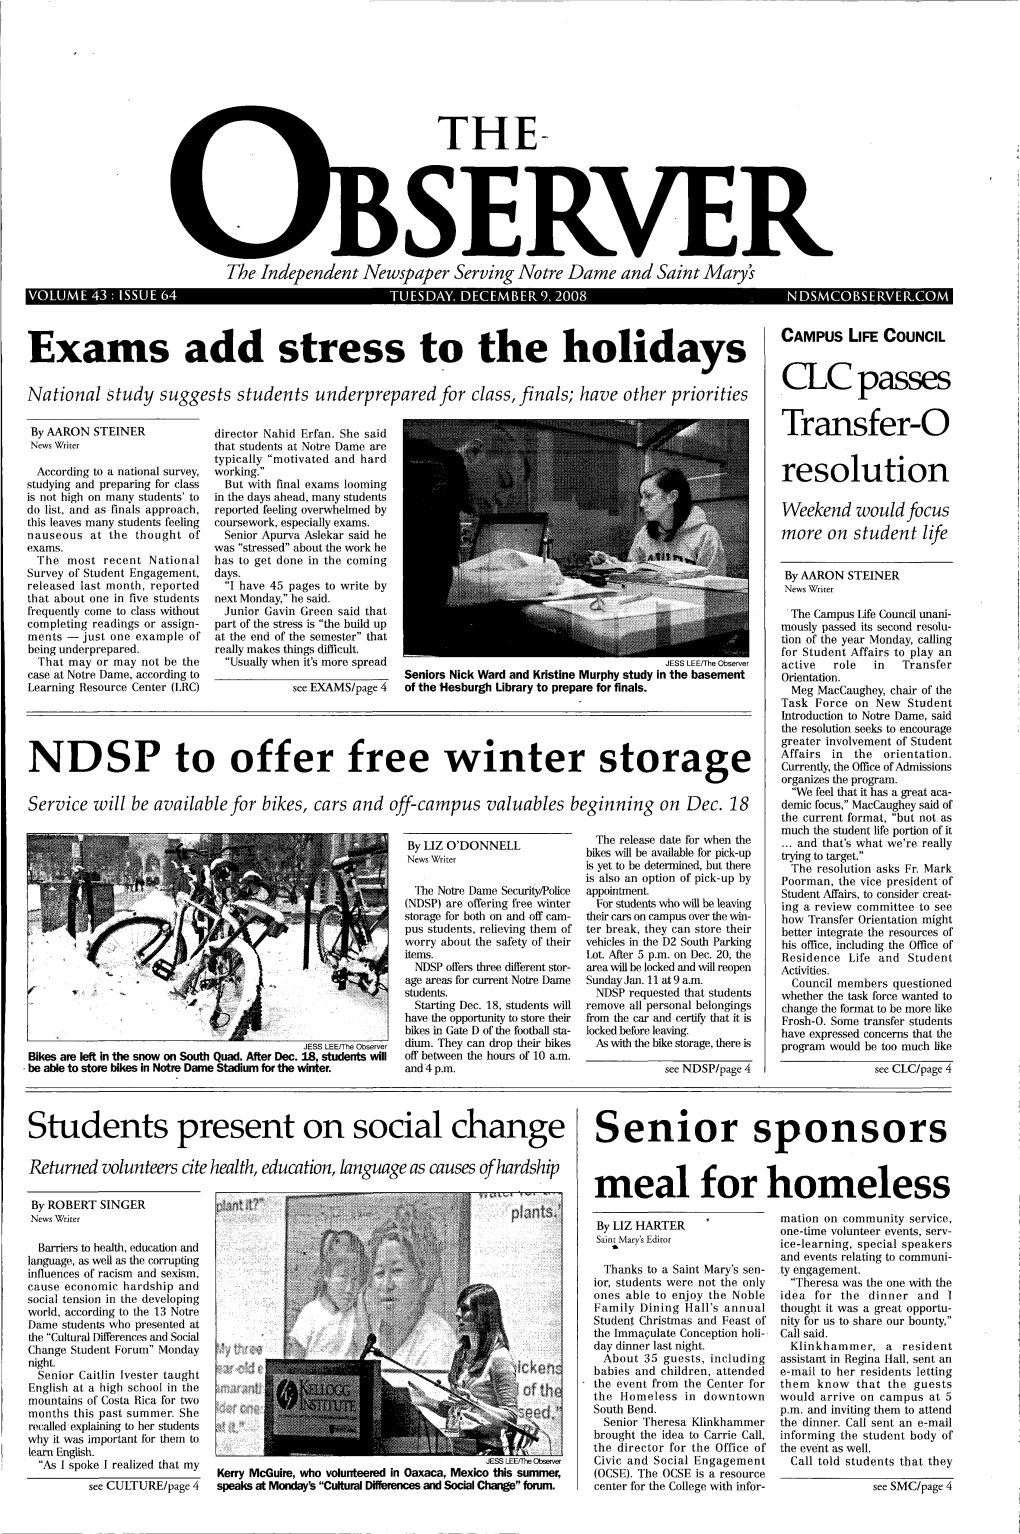 Exams Add Stress to the Holidays CAMPUS LIFE COUNCIL National Study Suggests Students Underprepared for Class, Finals; Have Other Priorities Clcpasses